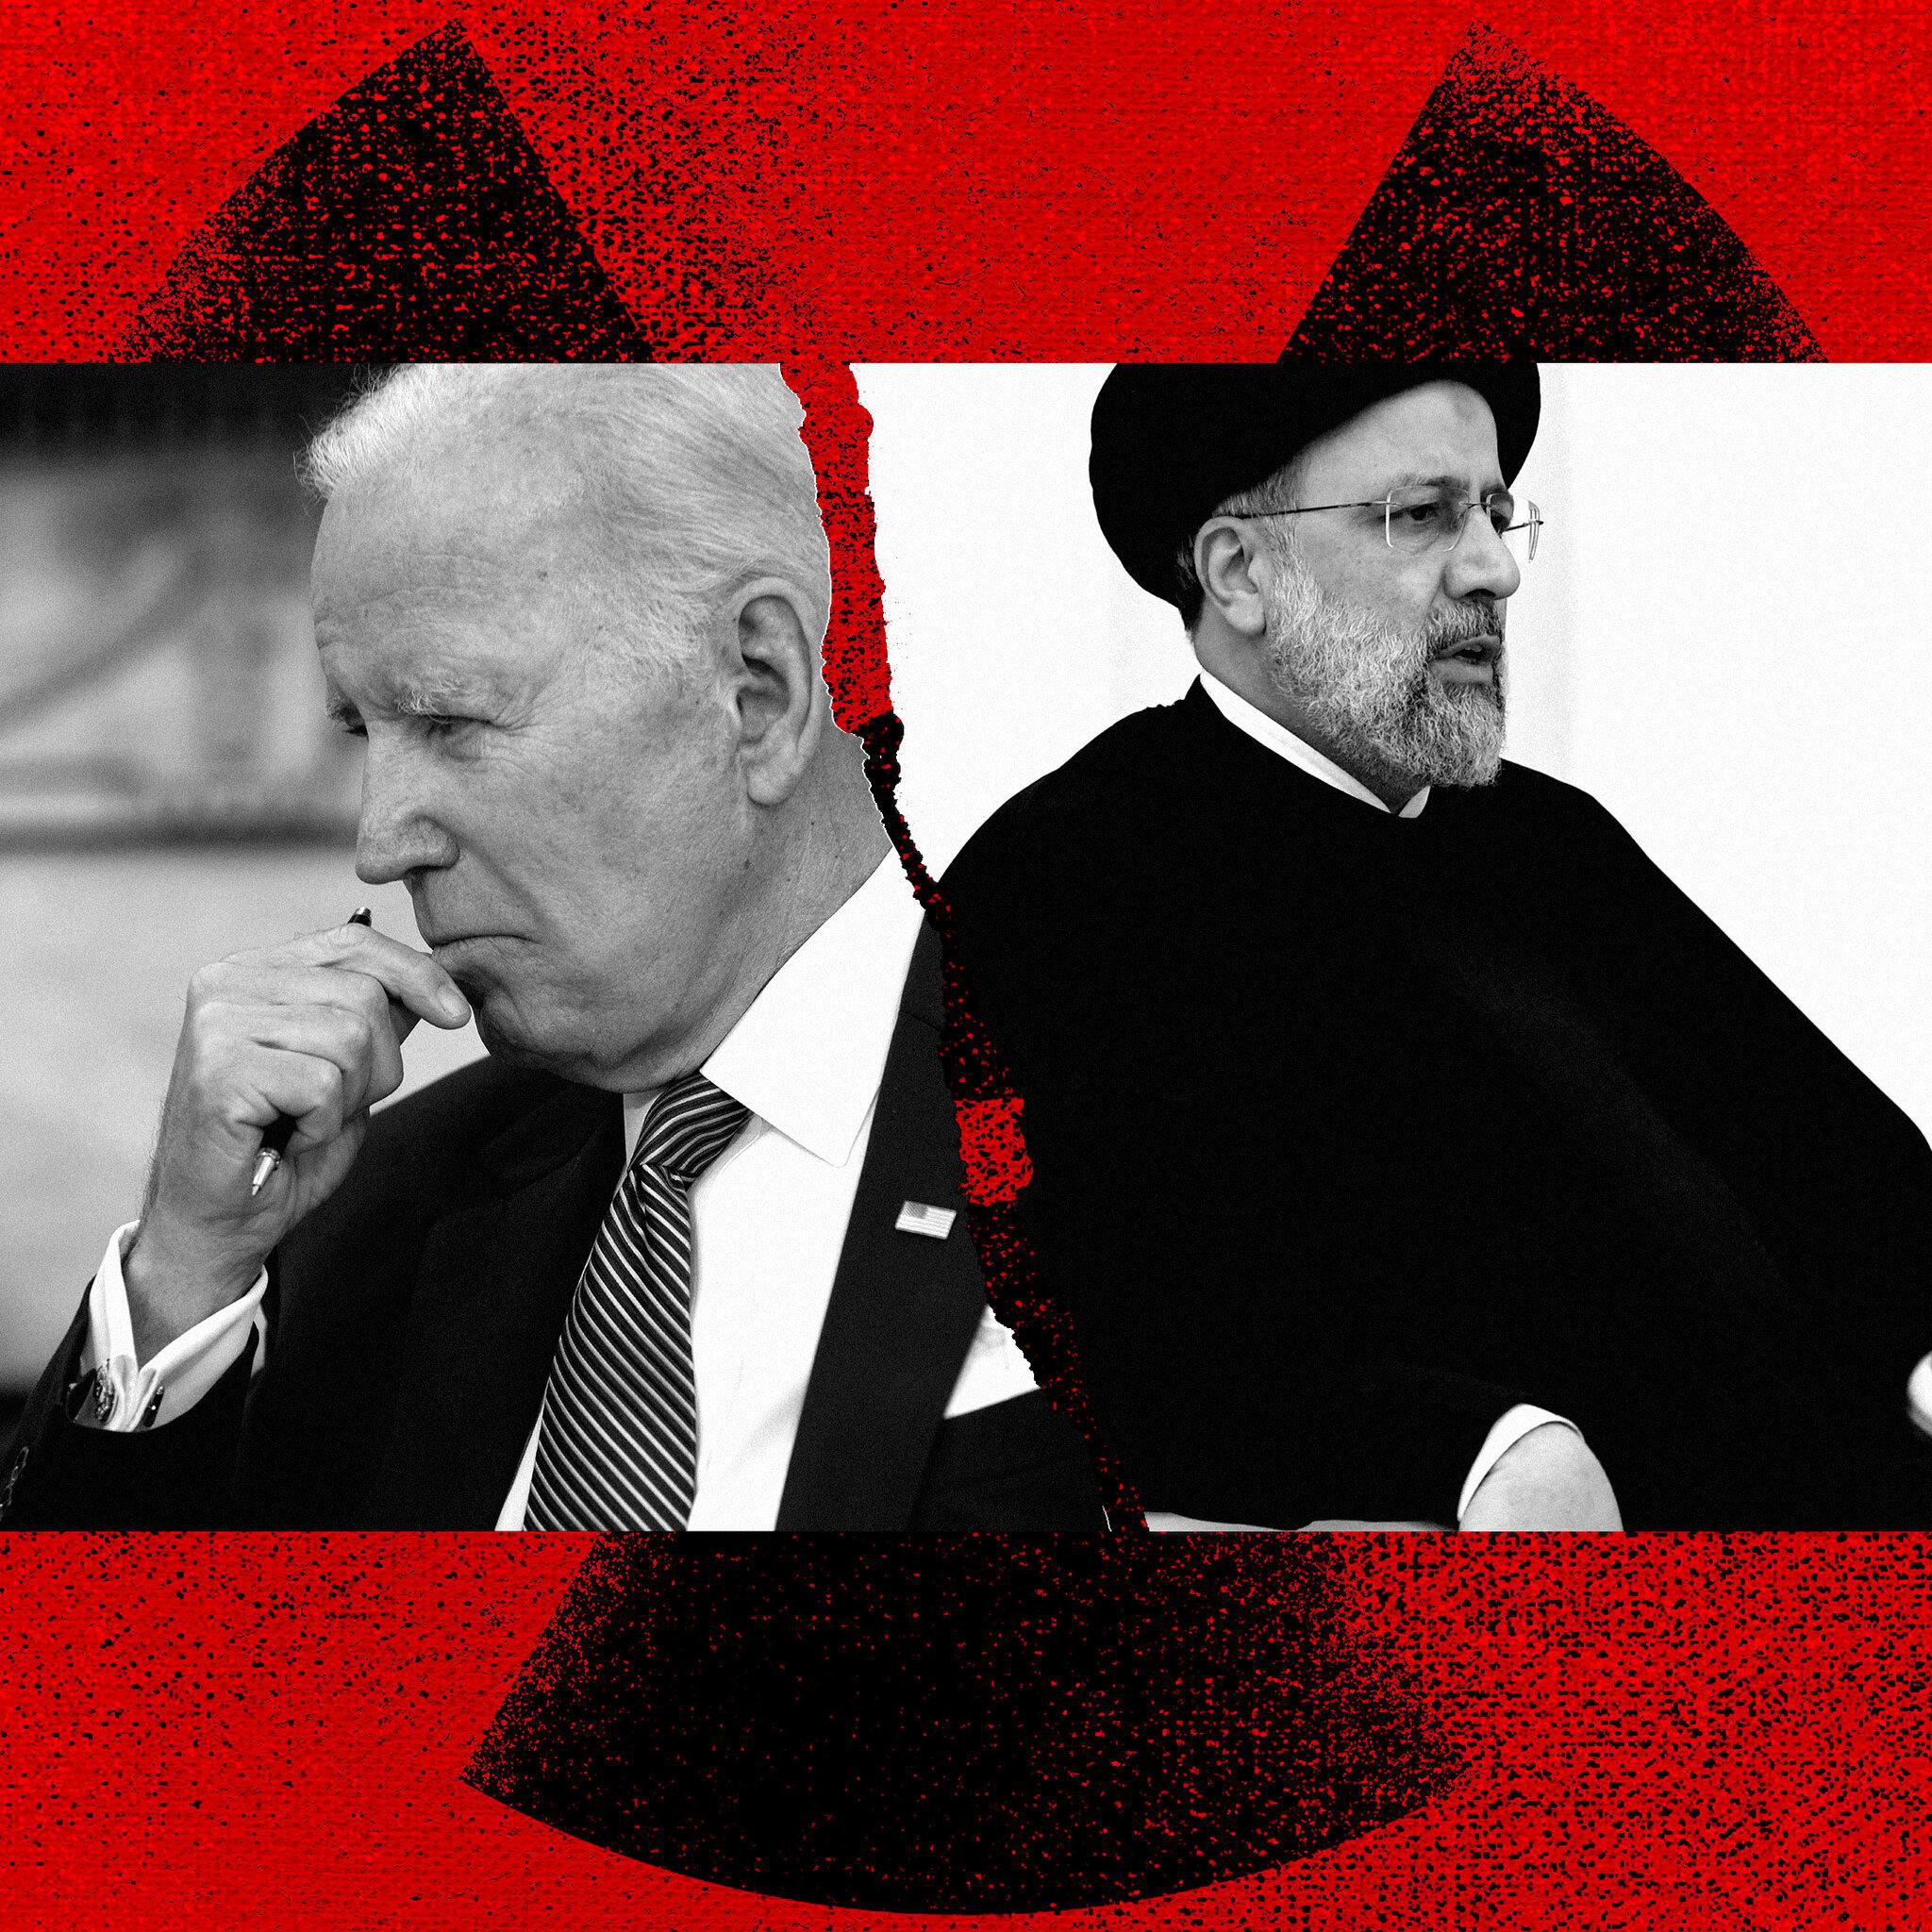 ifmat - The Biden administration must cease negotiations with the Iranian Regime